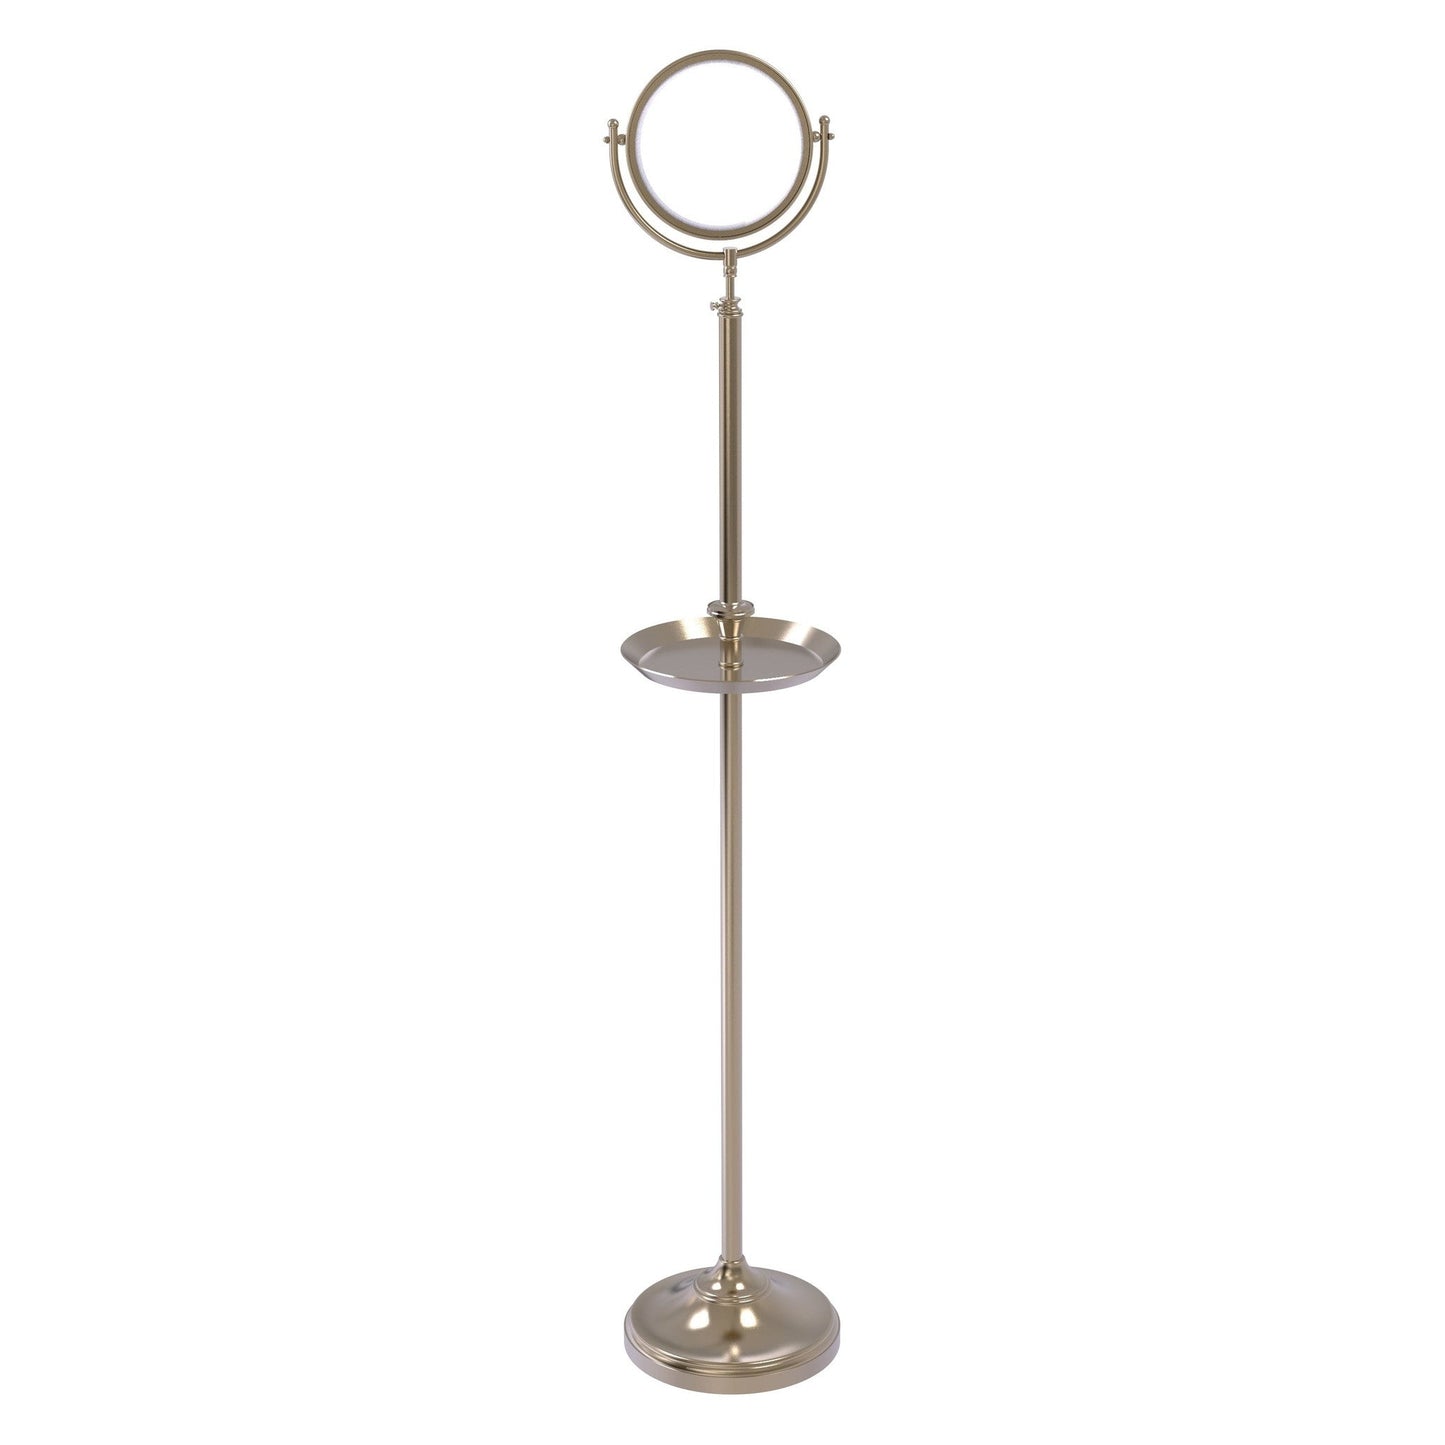 Allied Brass DMF-3/3X 10.5" x 10.5" Antique Pewter Solid Brass Floor Standing Make-Up Mirror With 3X Magnification and Shaving Tray